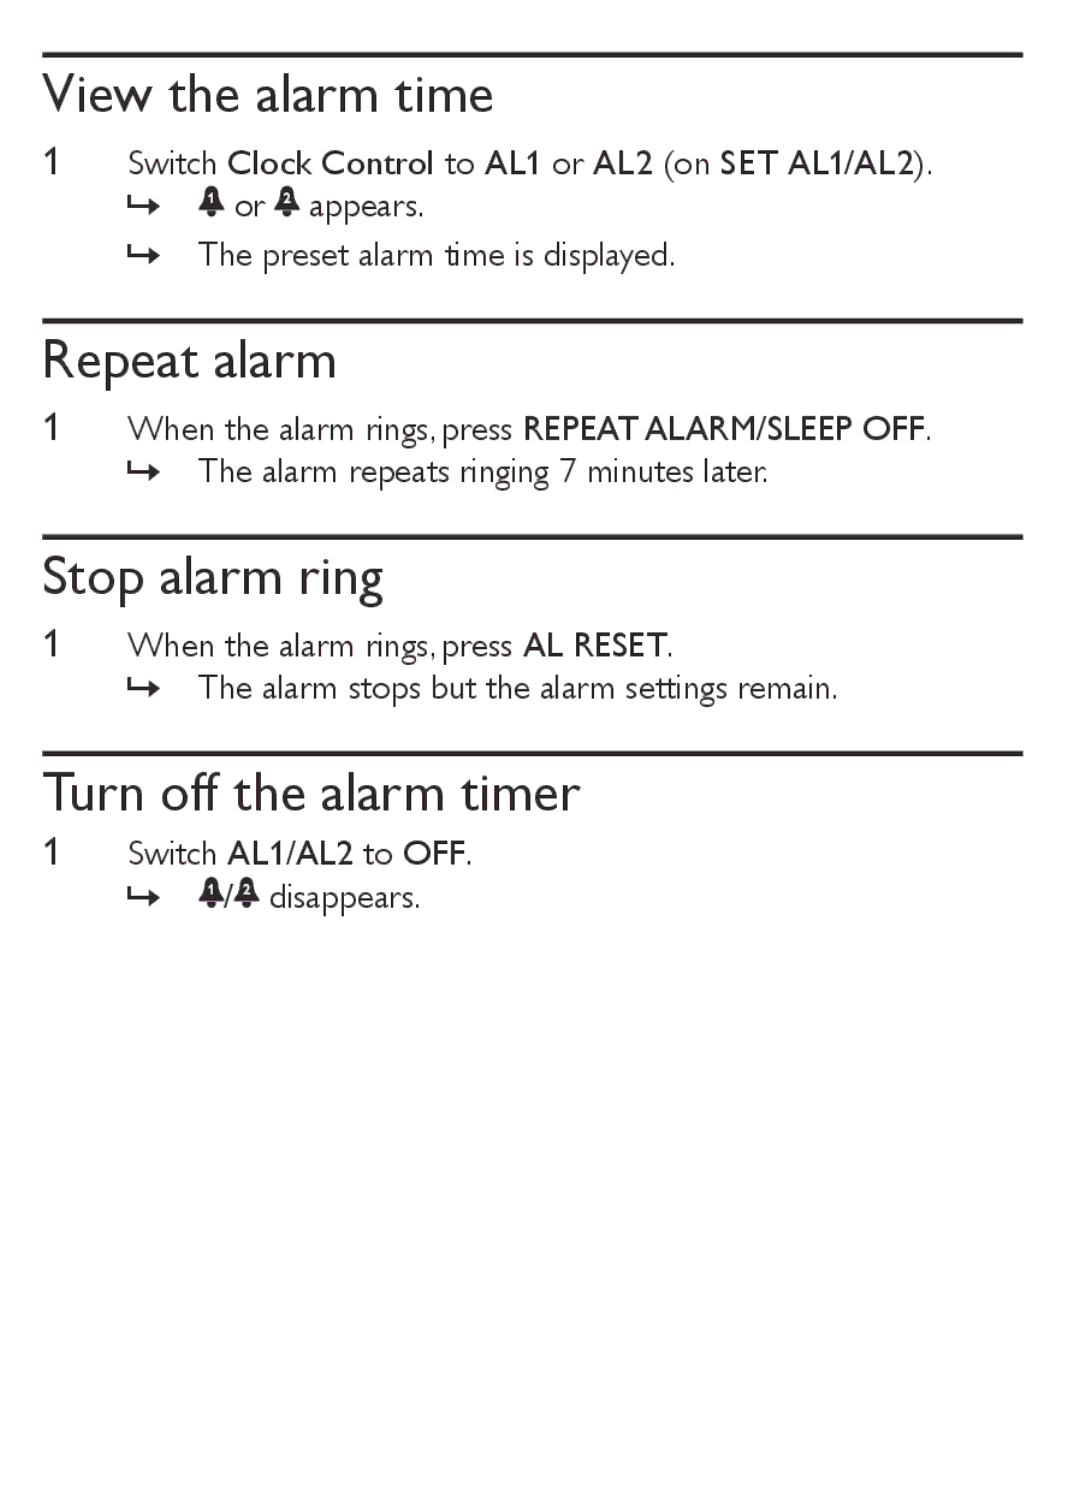 Philips AJ1000/12 user manual View the alarm time, Repeat alarm, Stop alarm ring, Turn off the alarm timer 